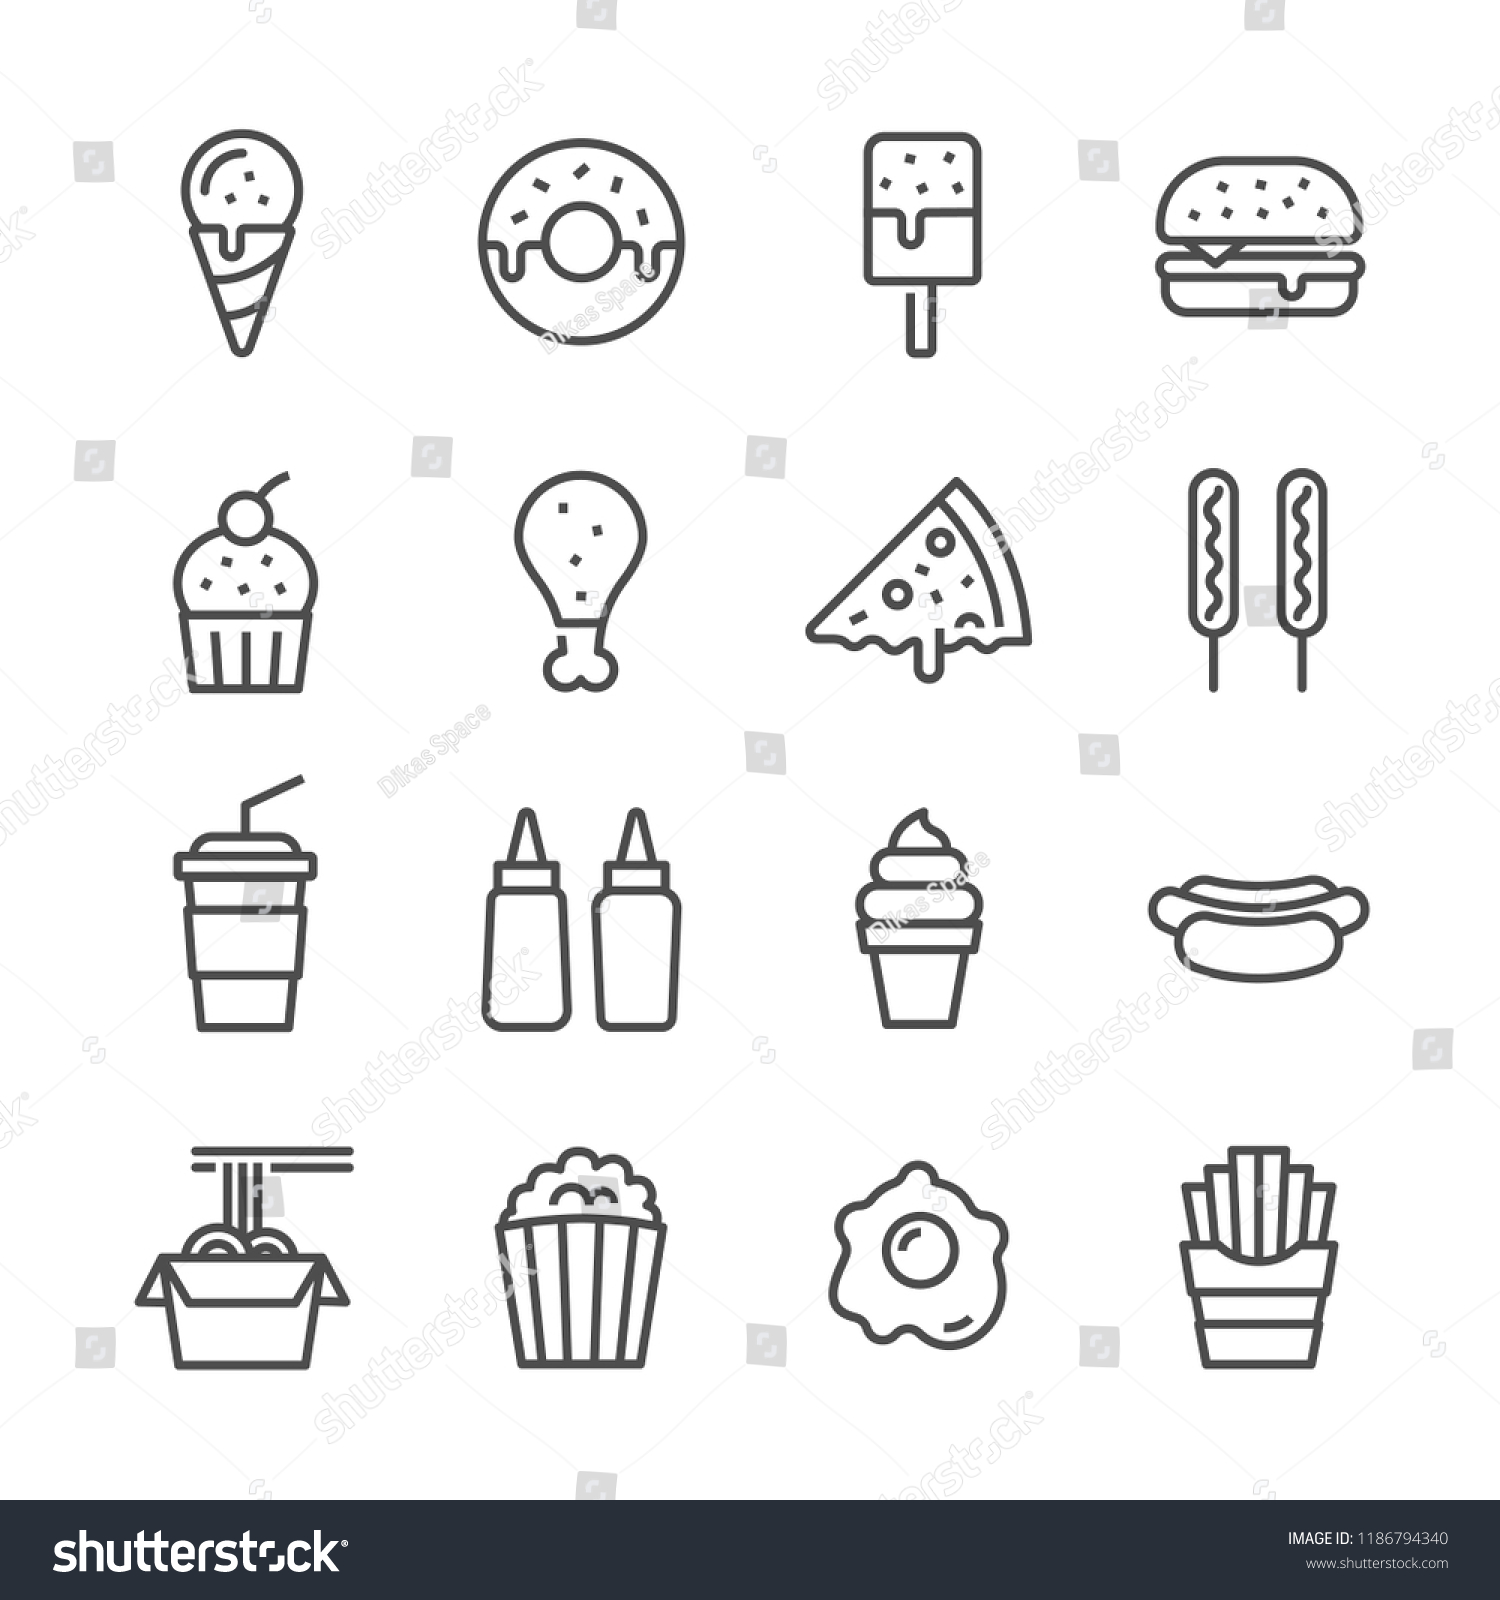 Fast food outline icon set vector image #1186794340